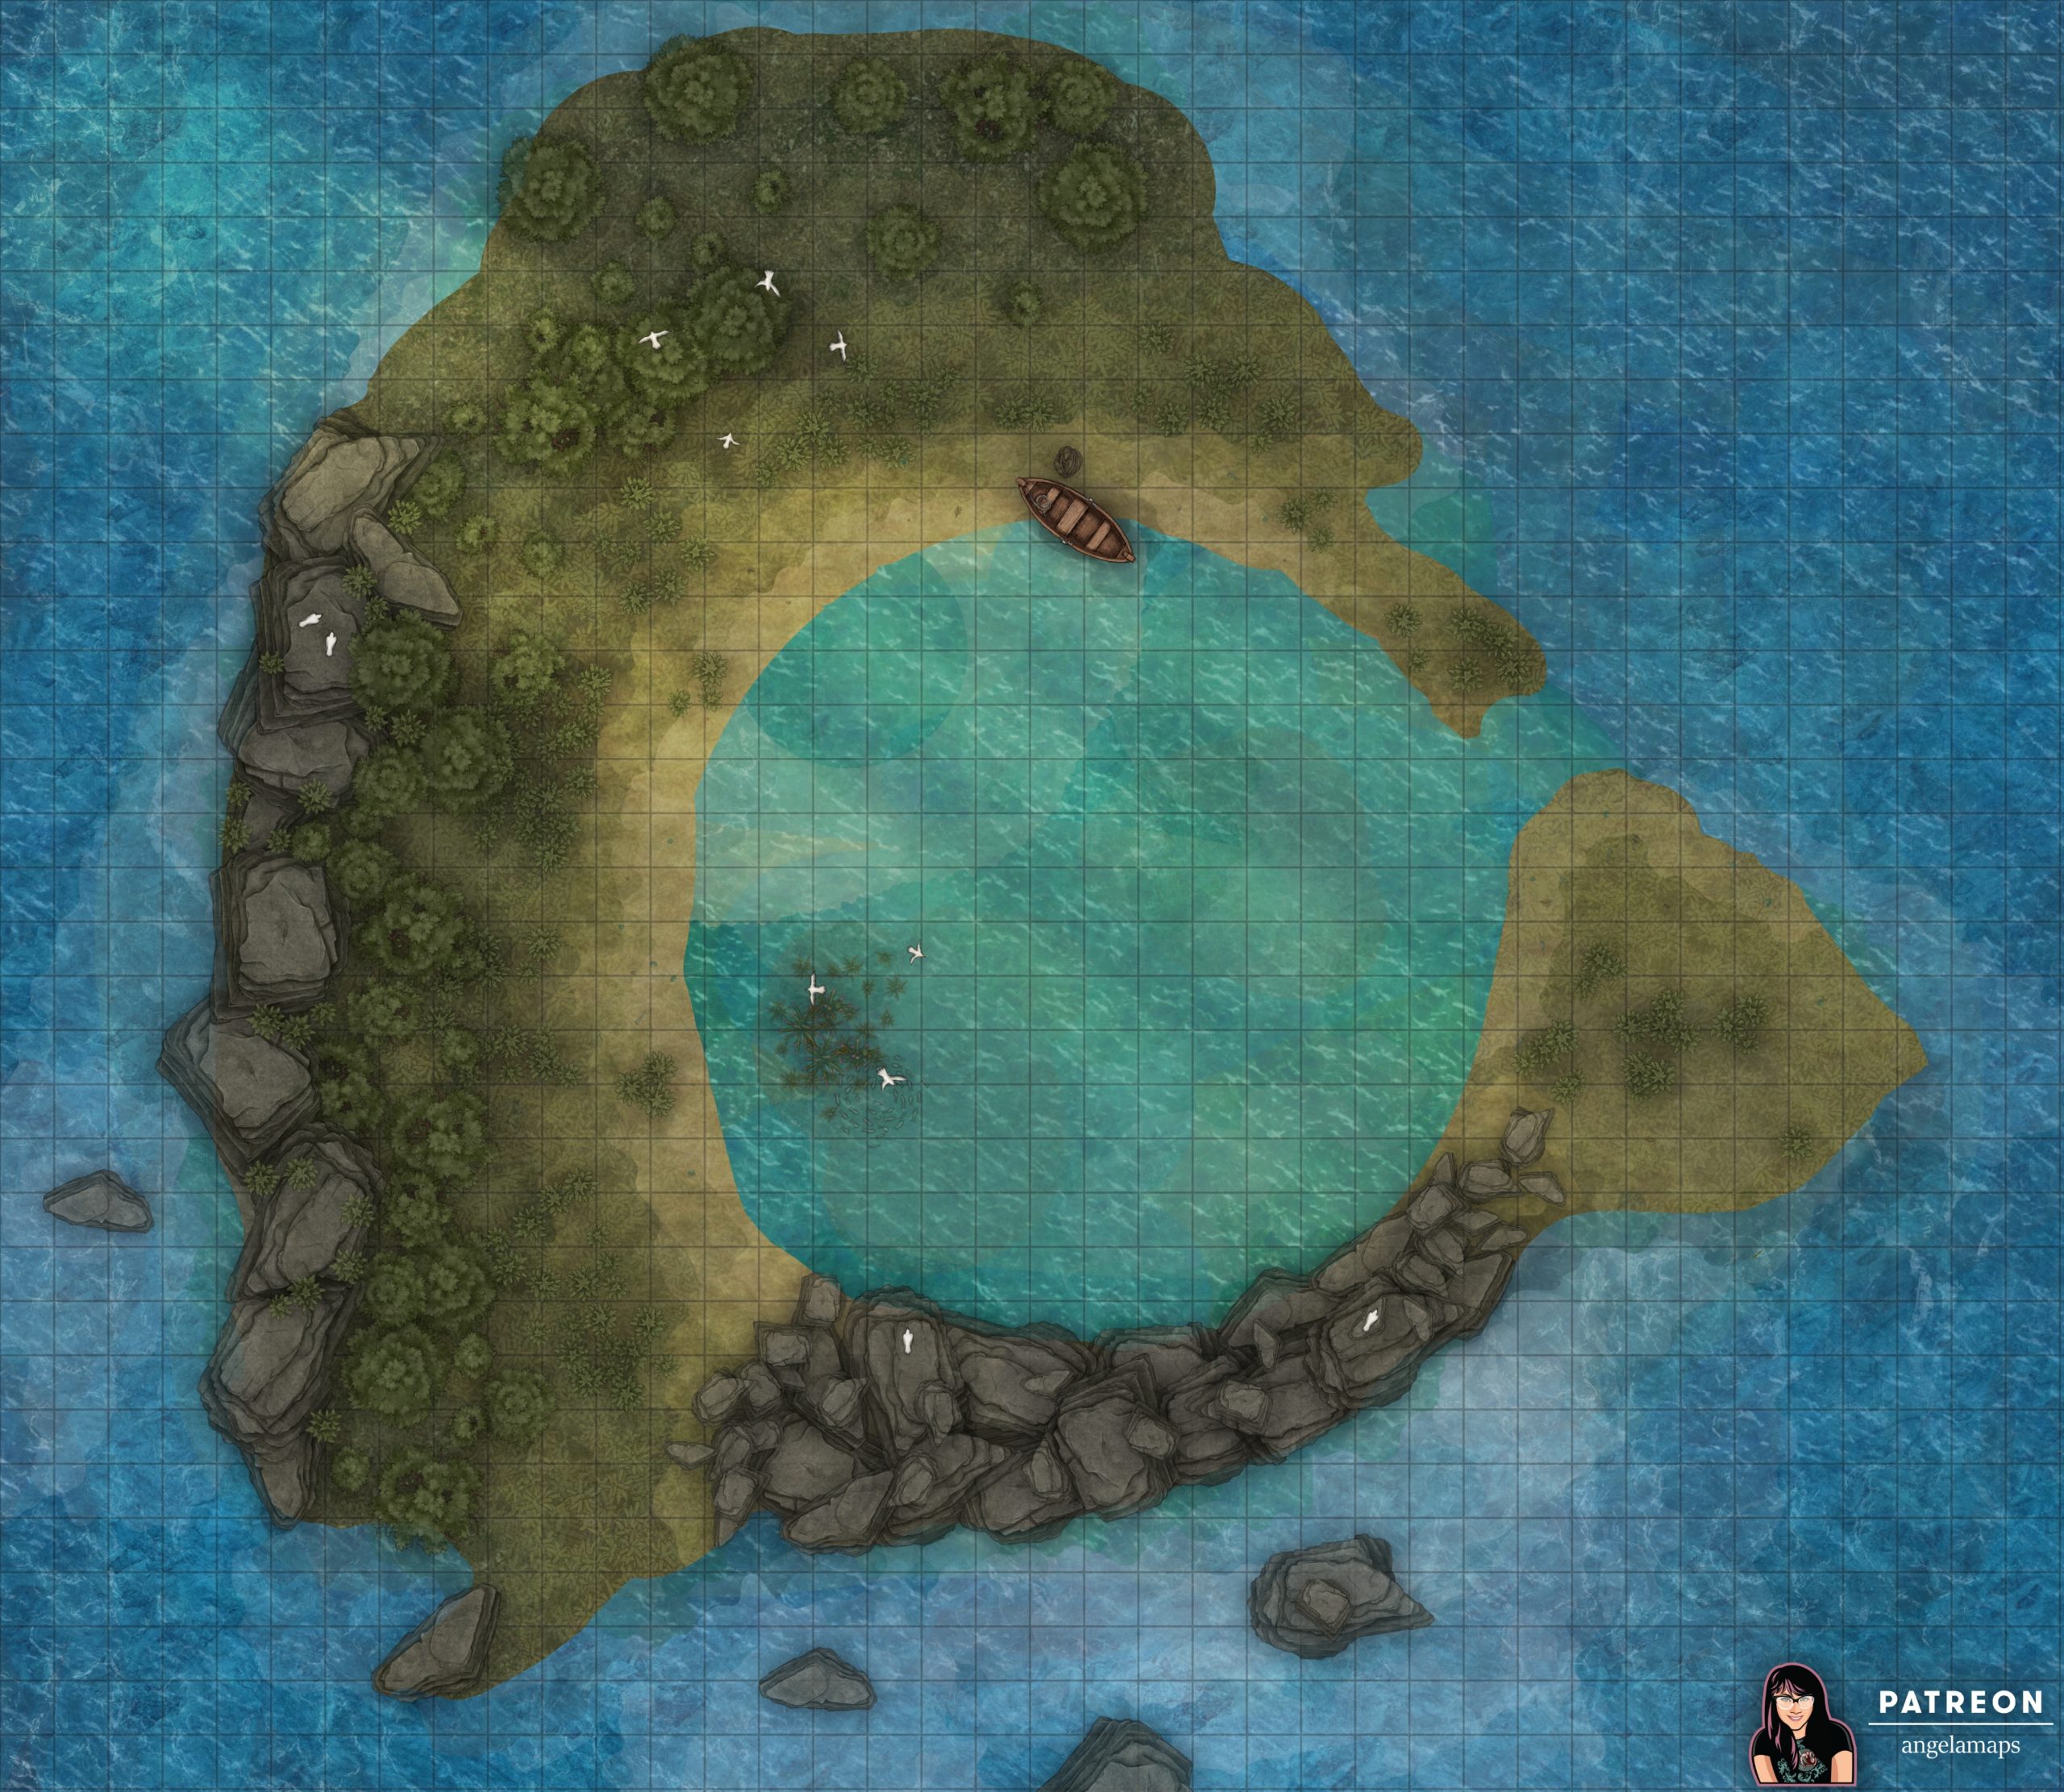 Small island (atoll) battle map for D&D